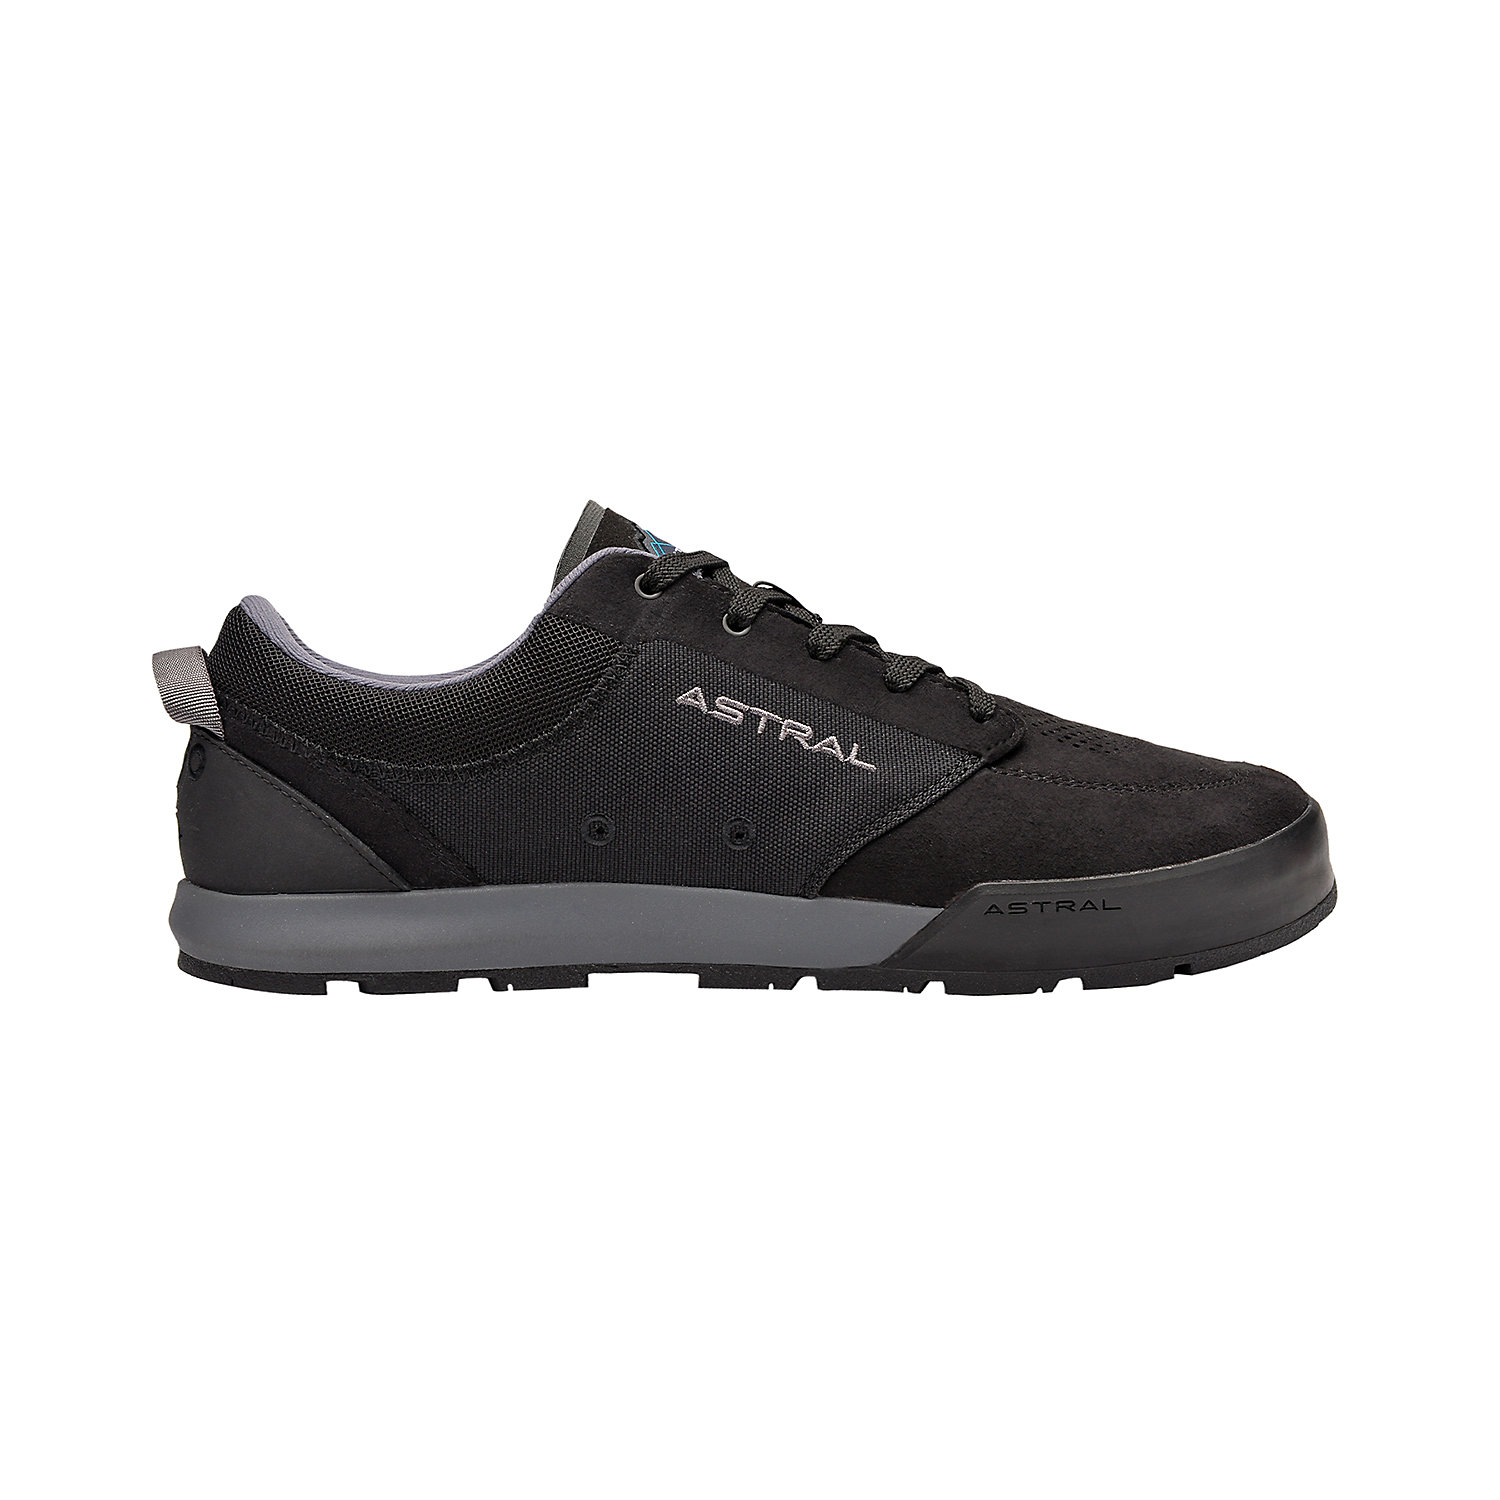 Astral Mens Rover Shoe